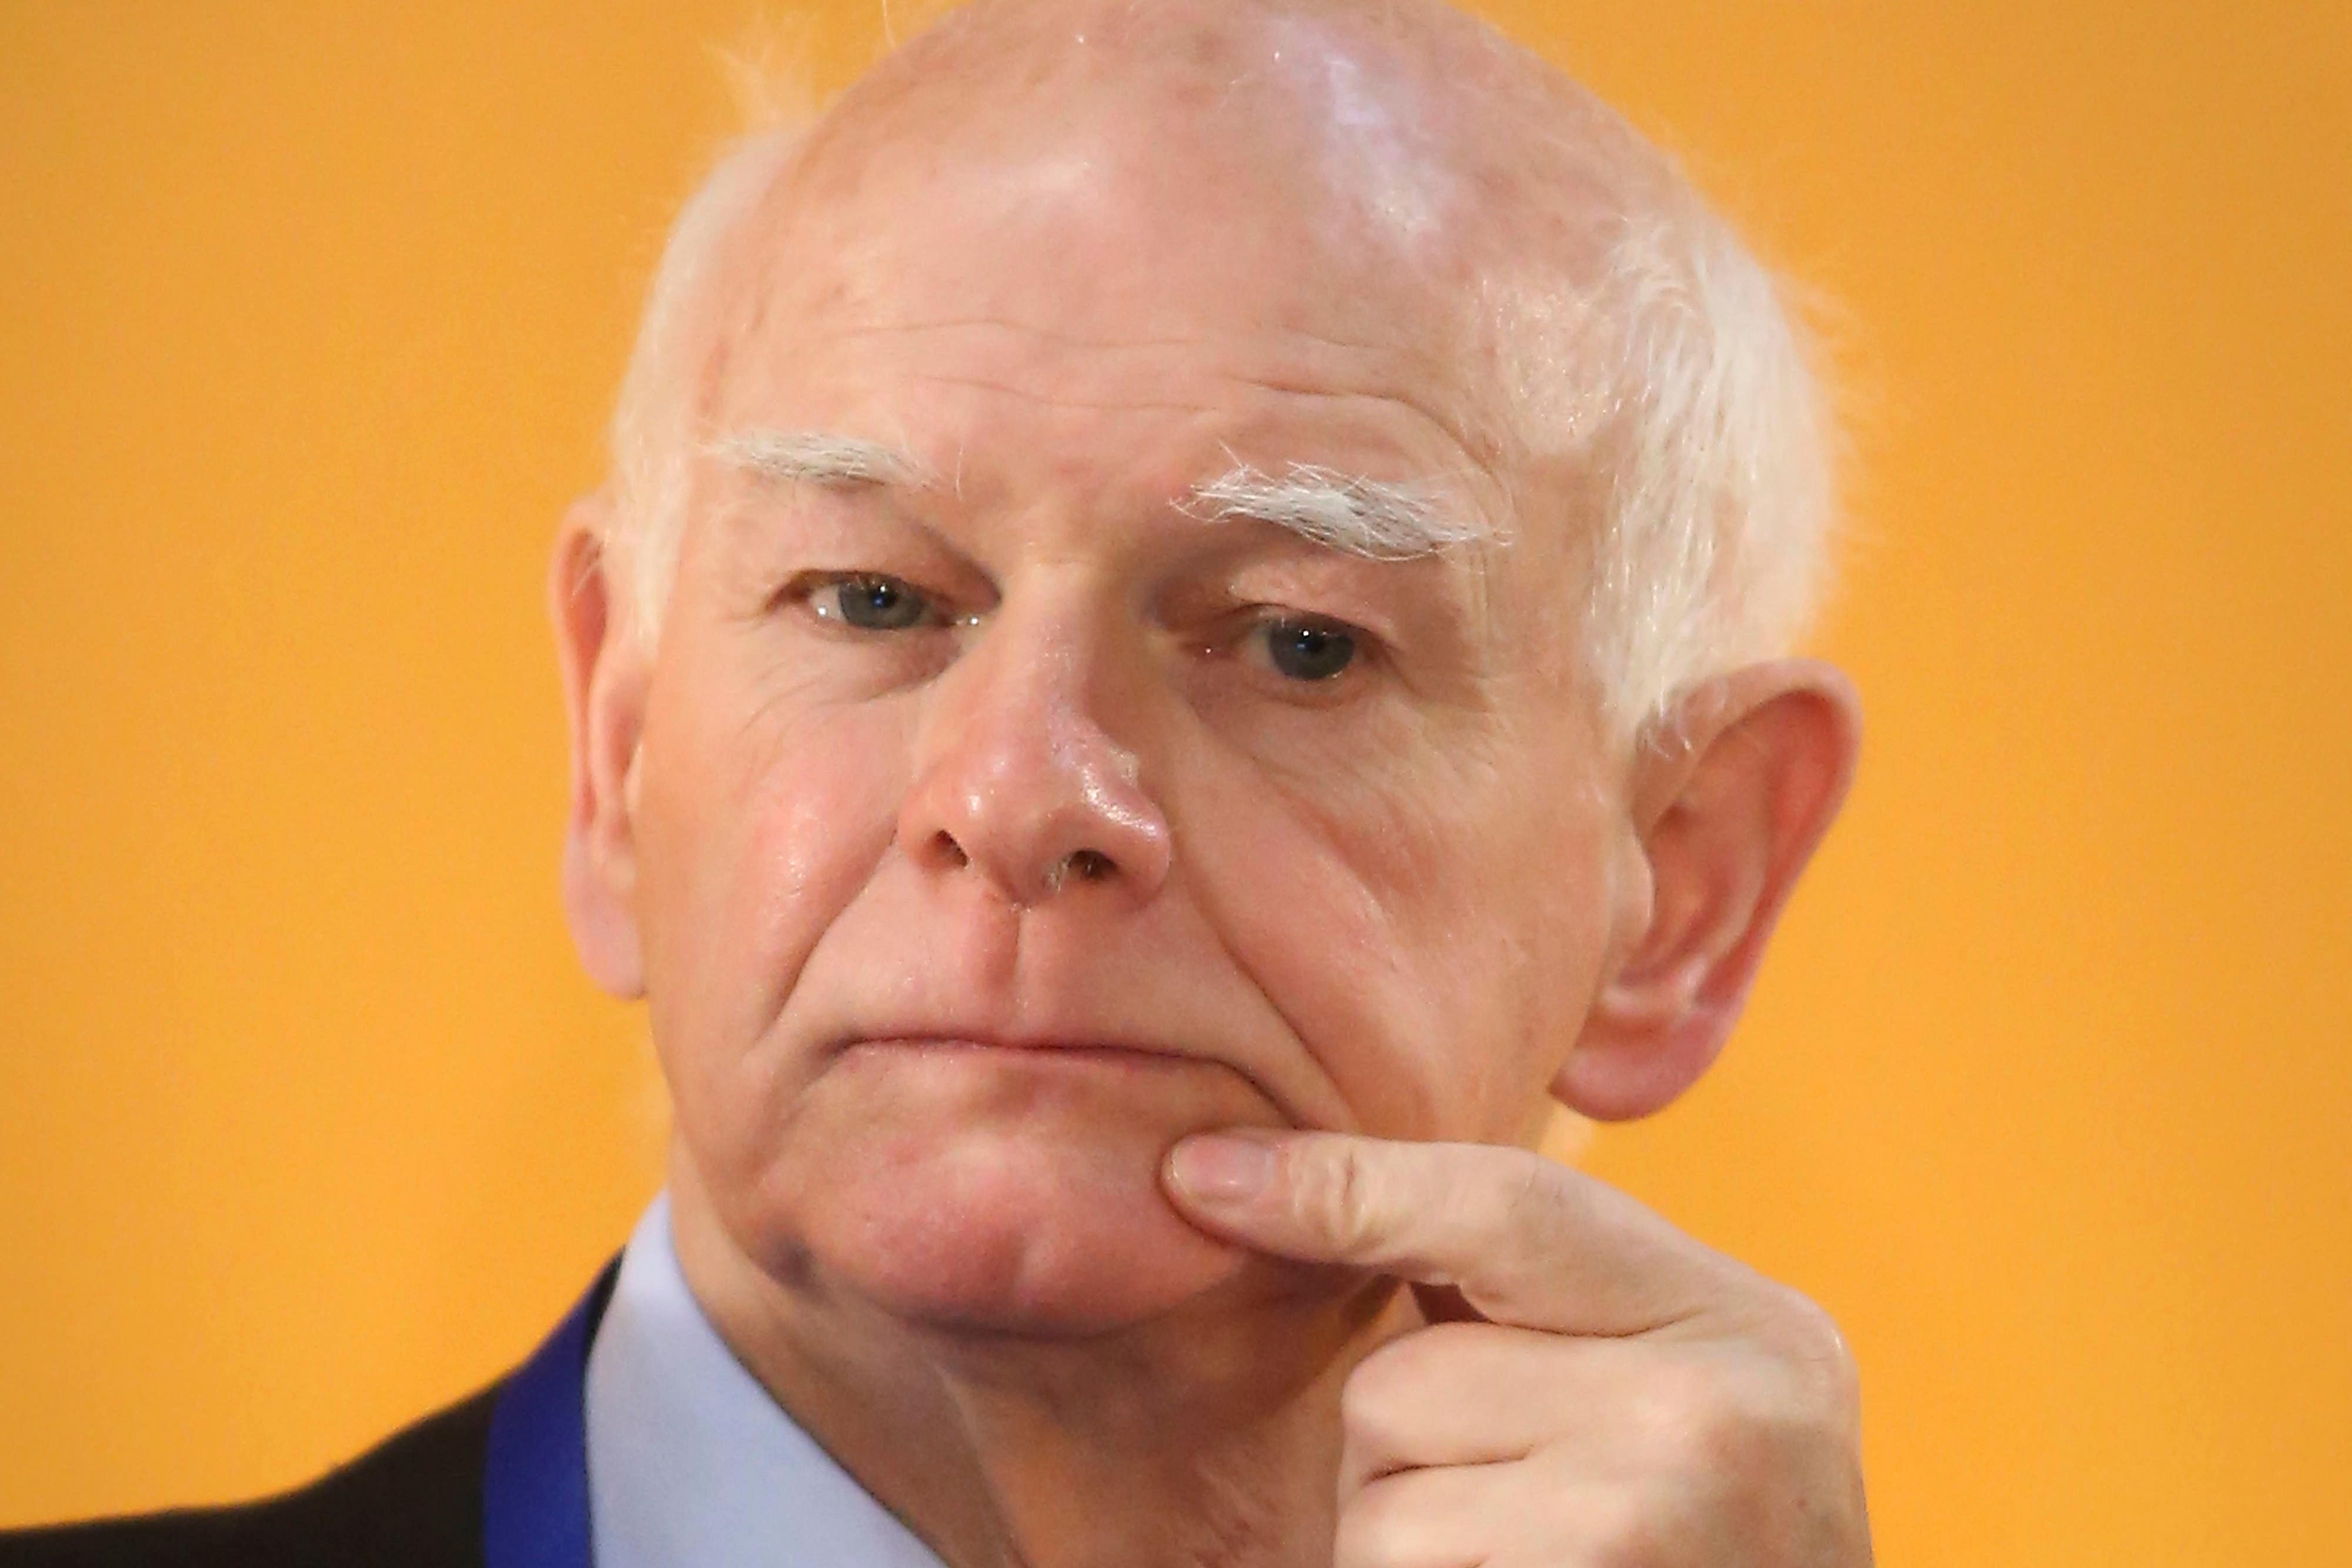 NatWest chair Sir Howard Davies said it was ‘not that difficult’ to get on property ladder